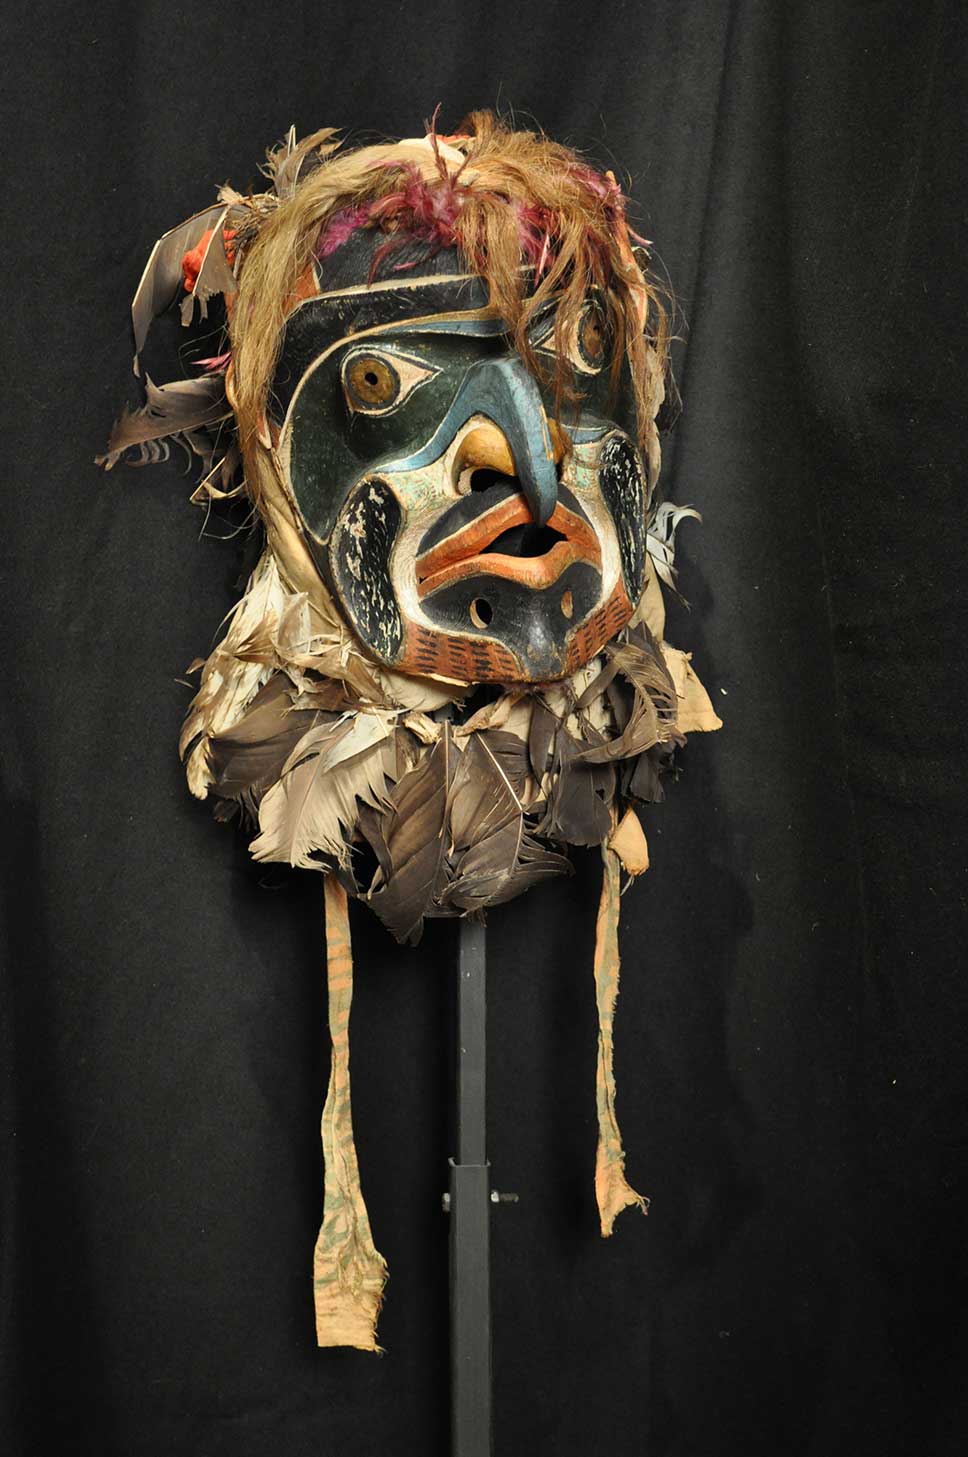 Colour photograph shows Bakwas – Wild Man of the Woods mask shot against a black background